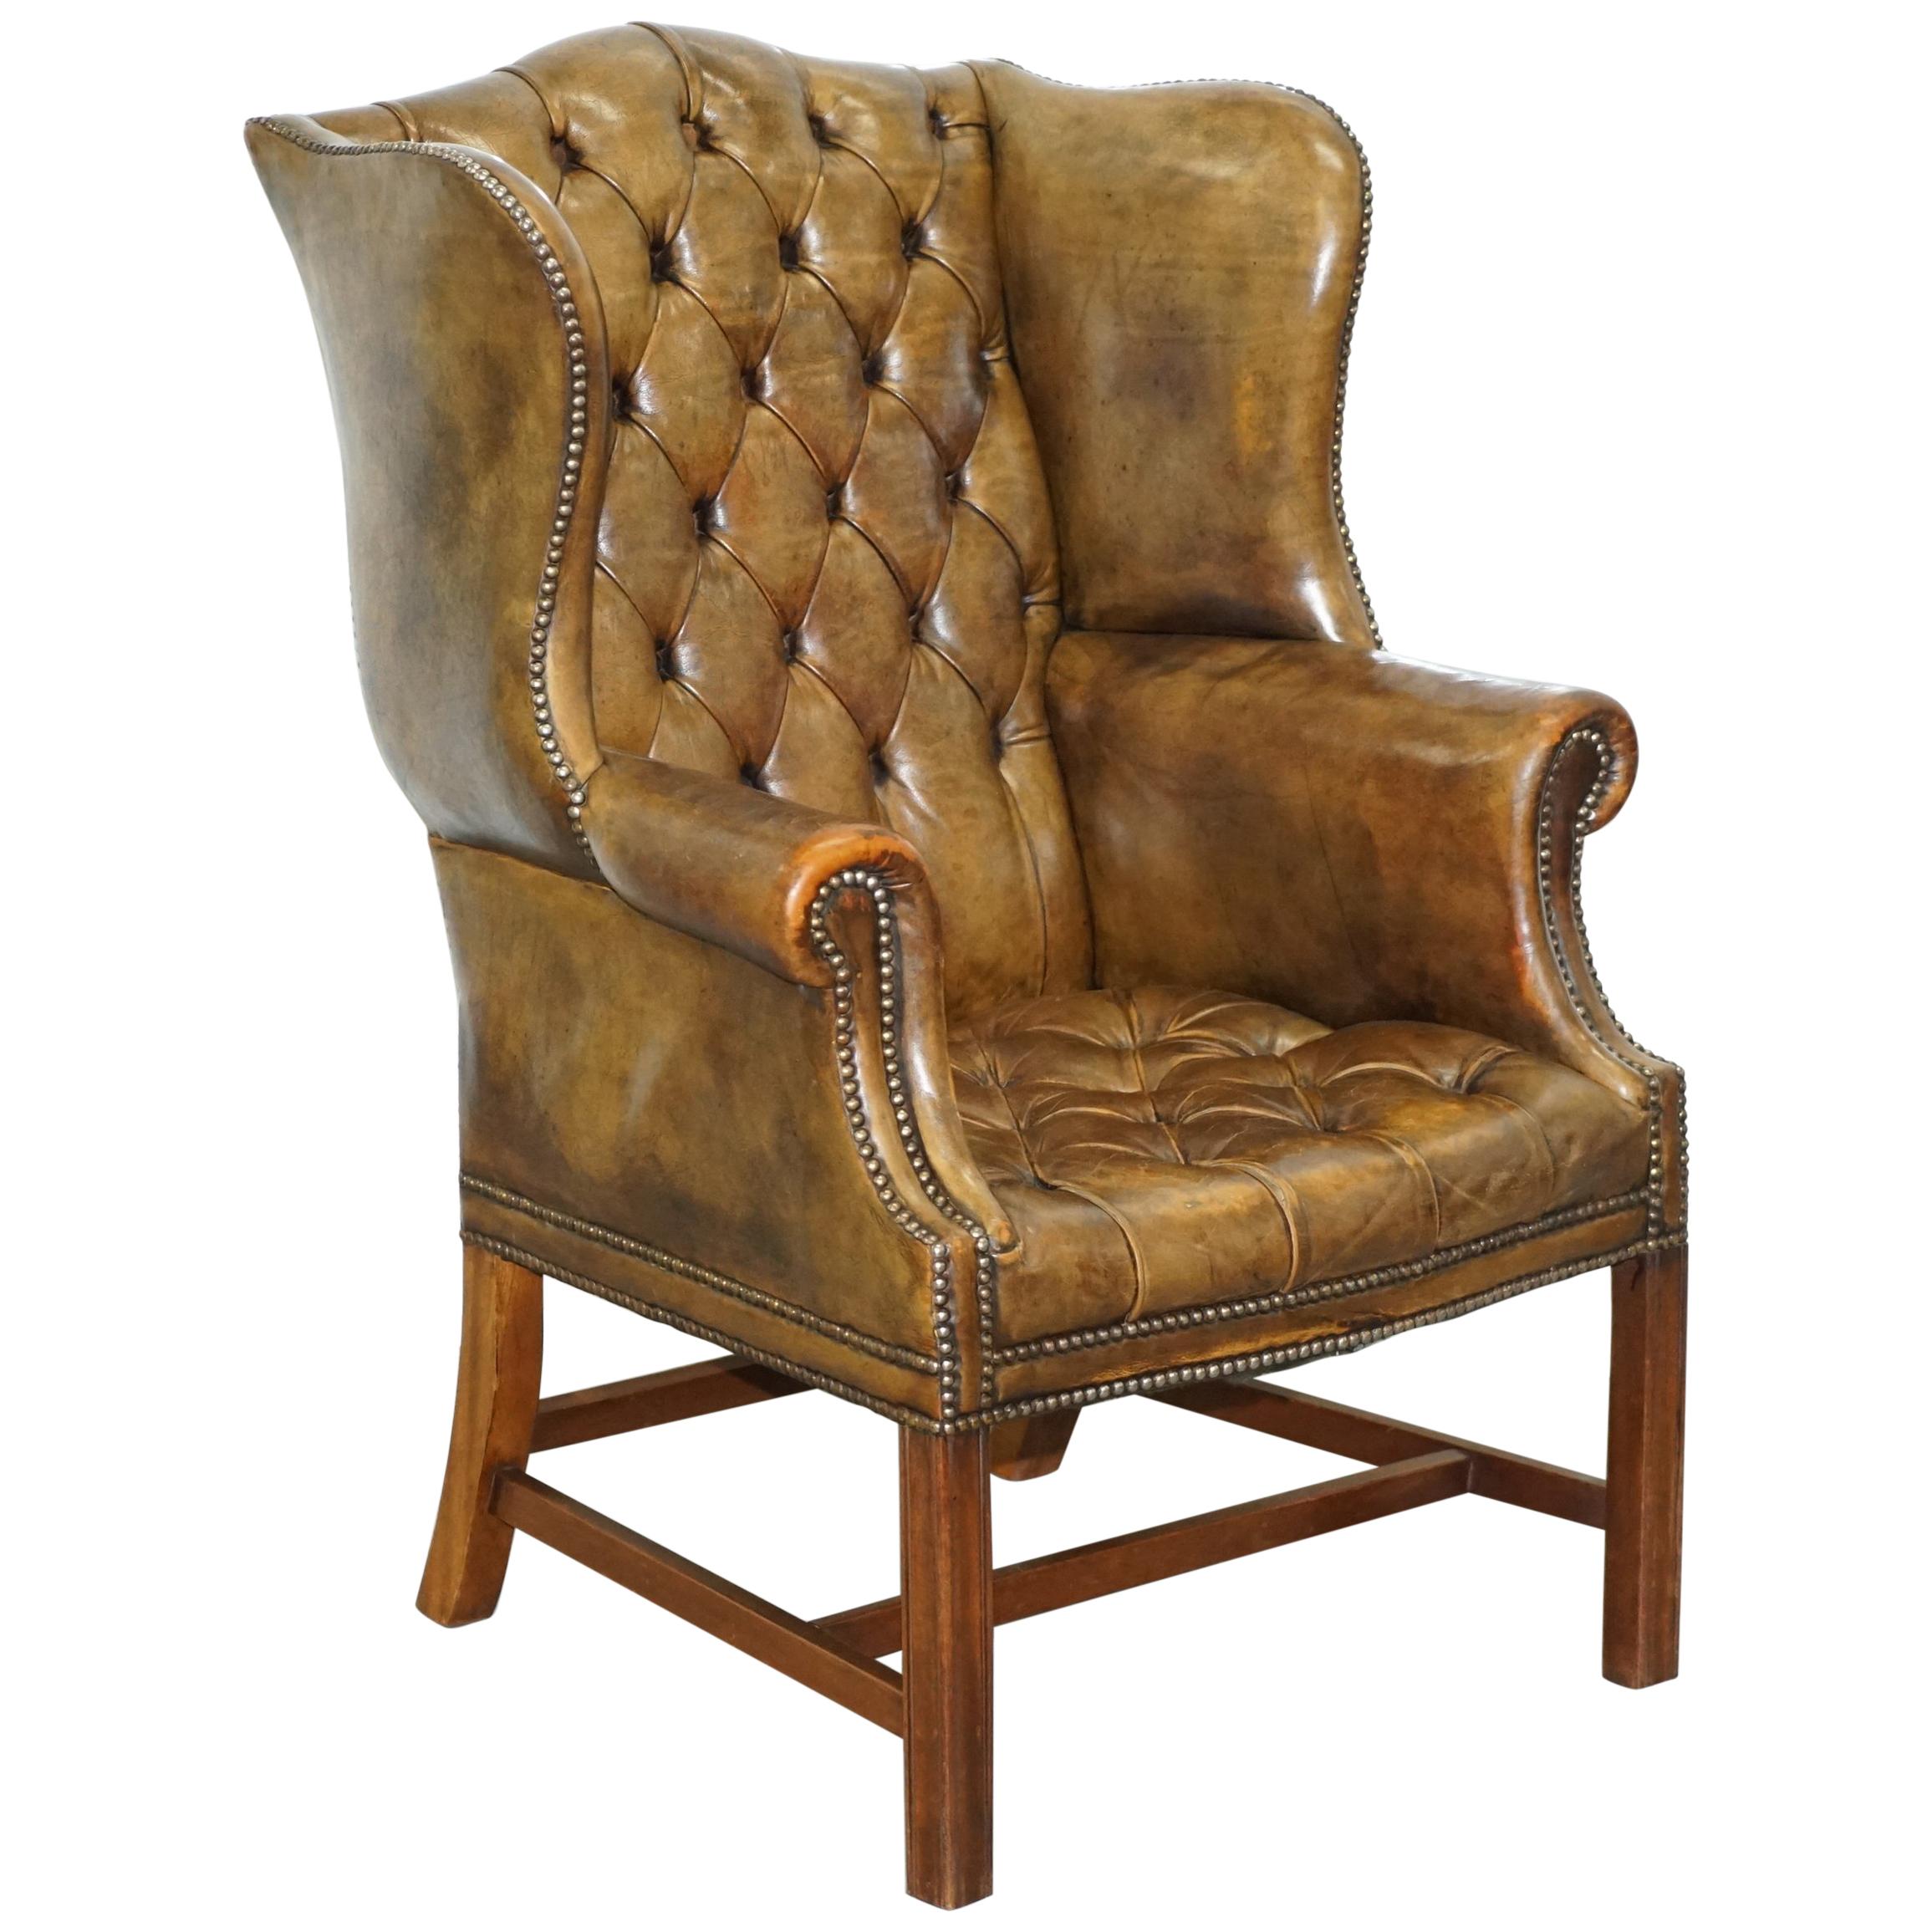 Very Rare Original 1930s Chesterfield Fully Buttoned Leather Wingback Armchair